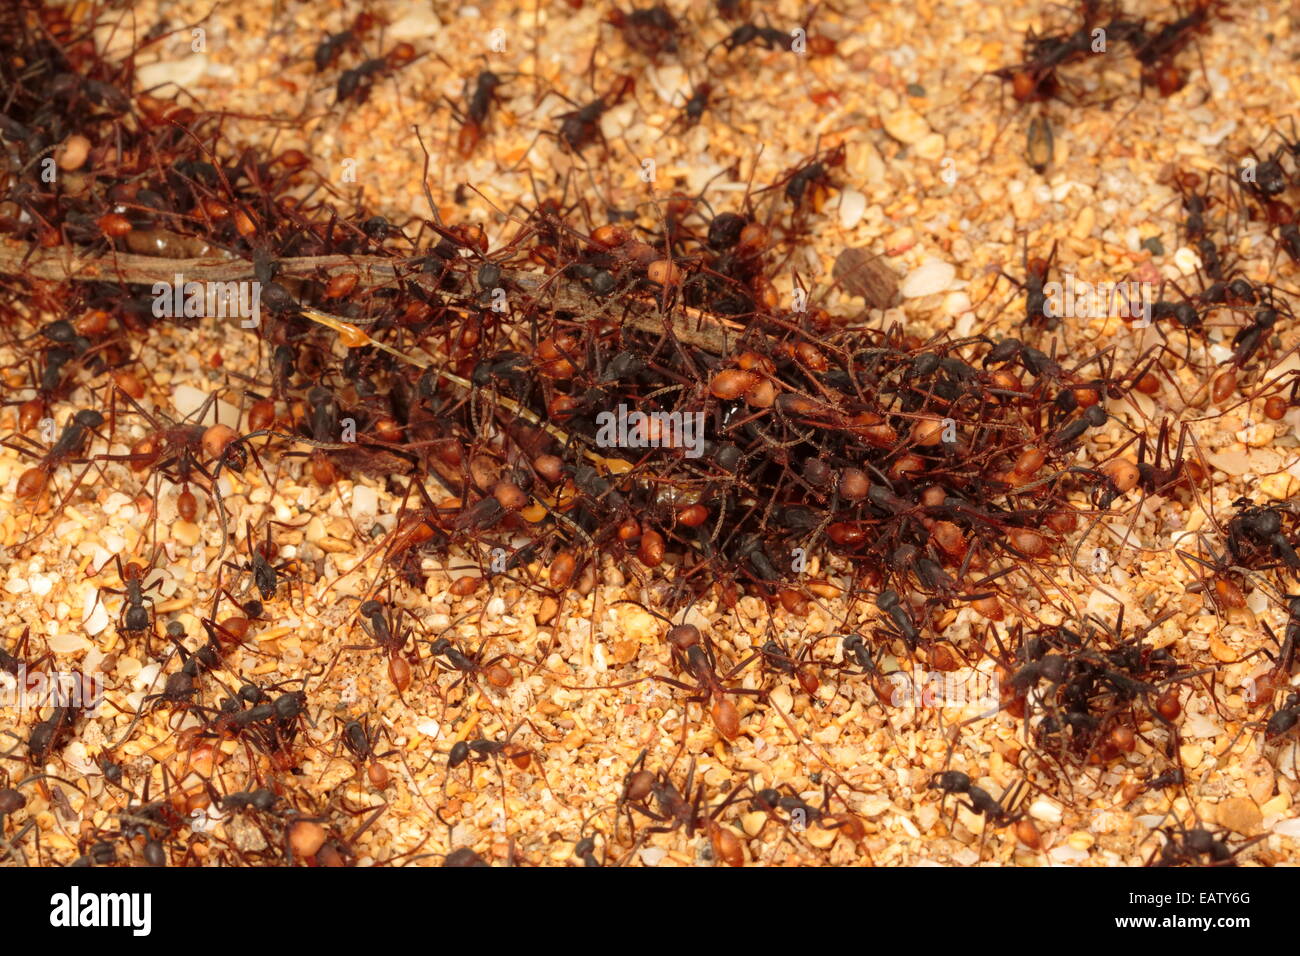 Army ants, Eciton species, dismembering a small animal on a jungle trail. Stock Photo